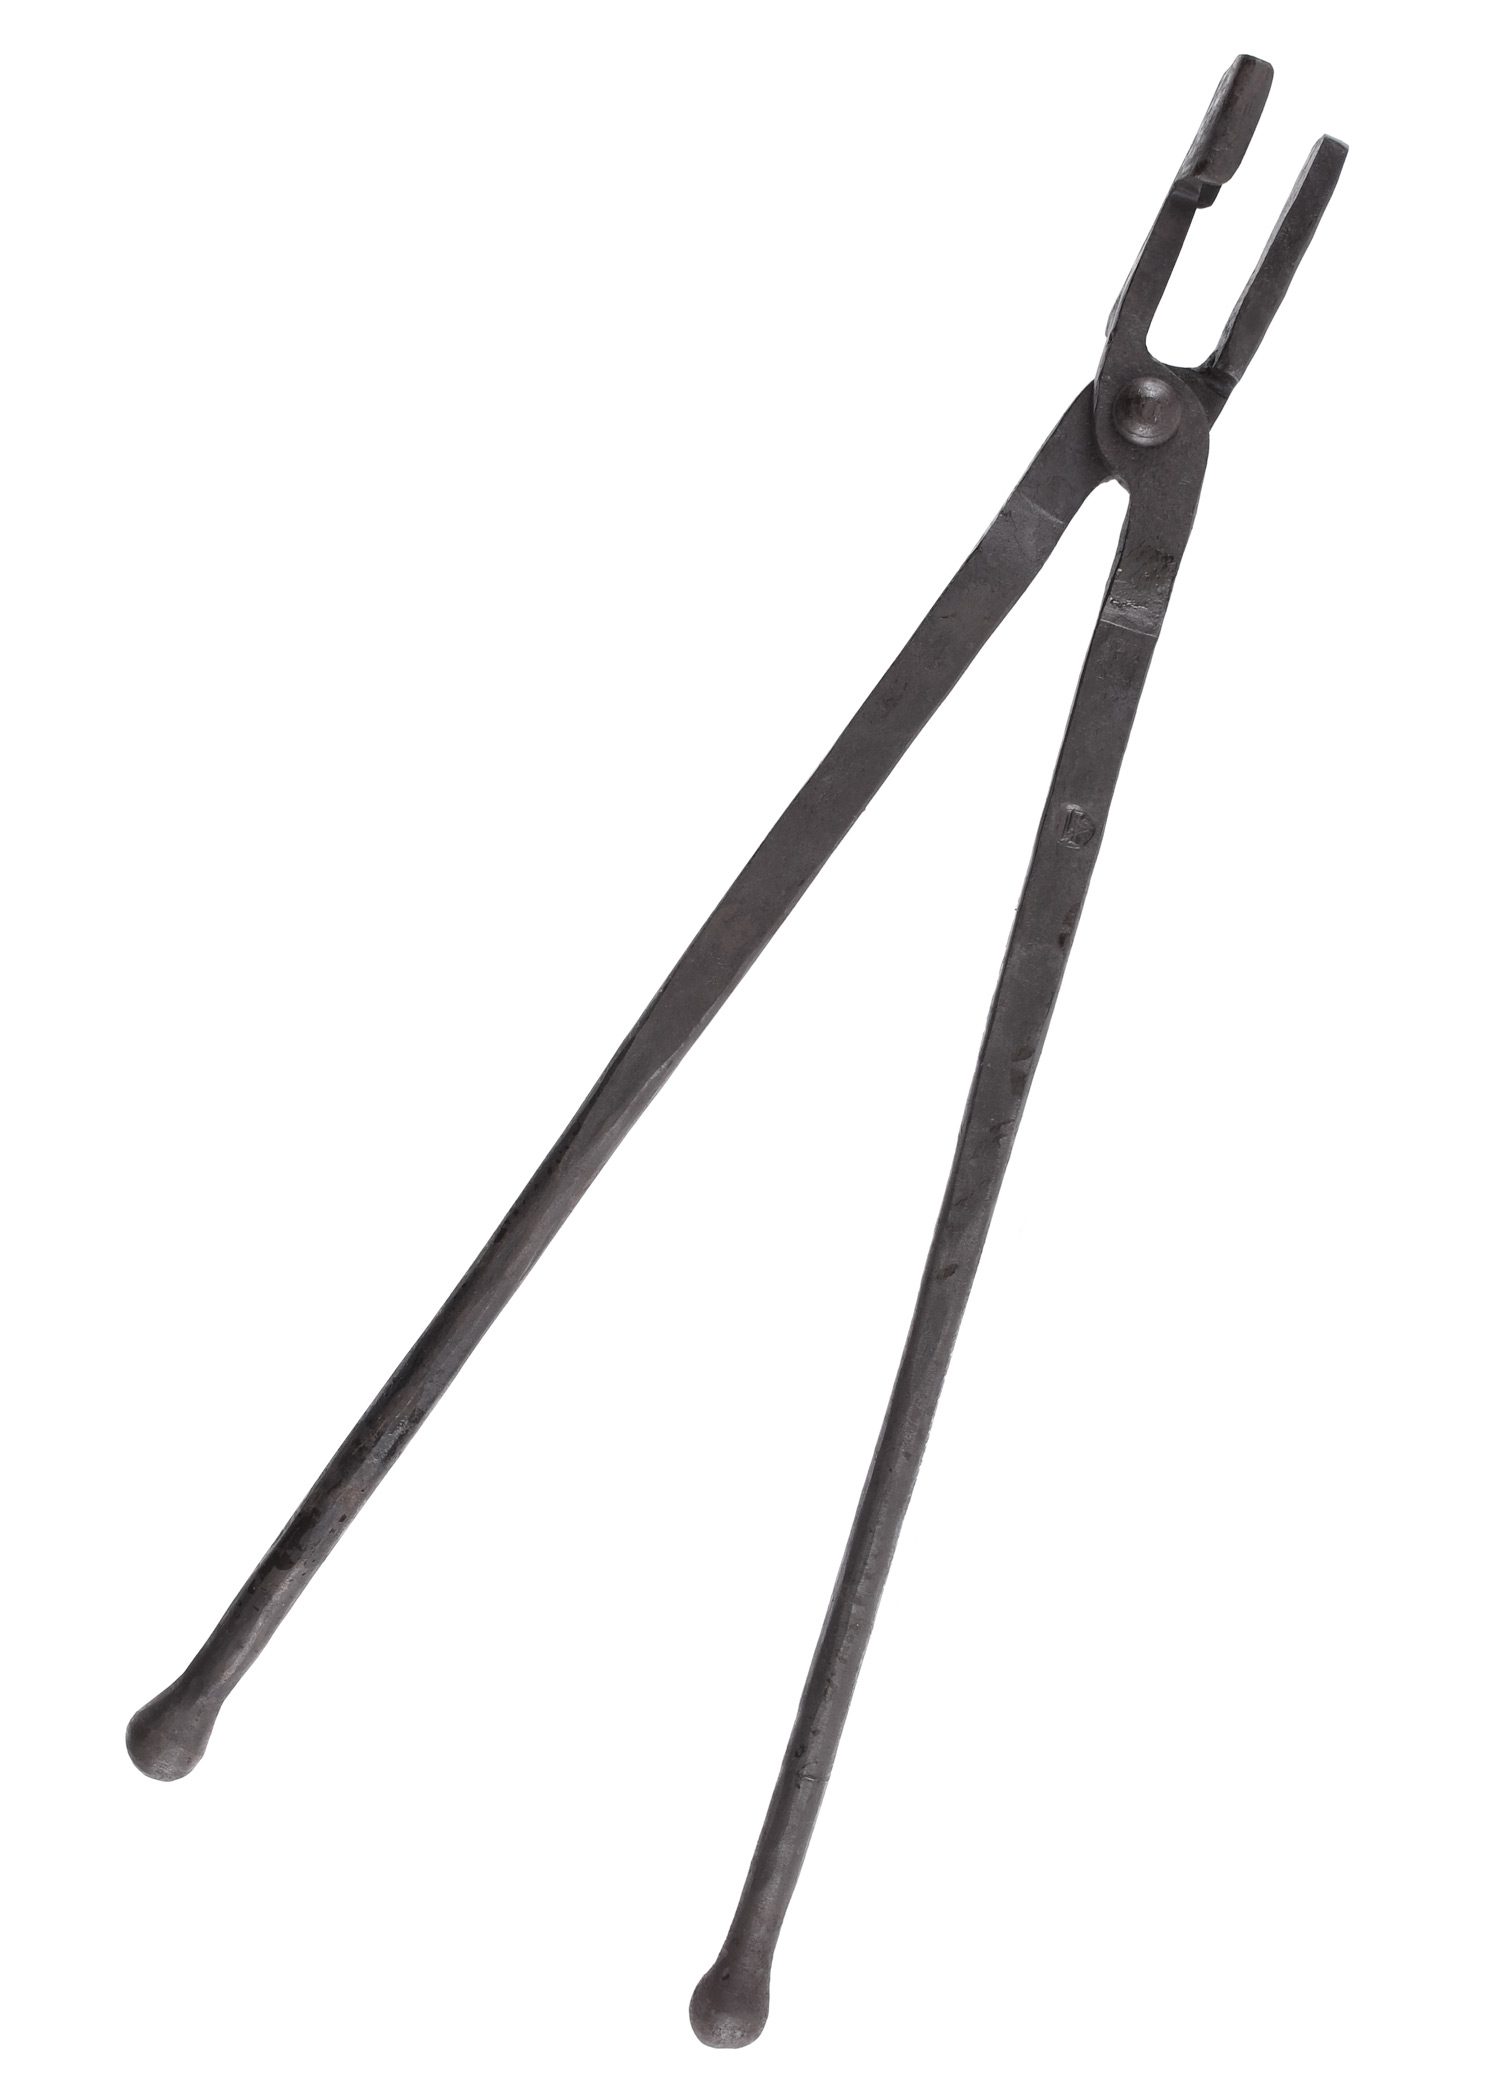 Small Hand-forged Kitchen Tongs Made of Quality Solid Steel